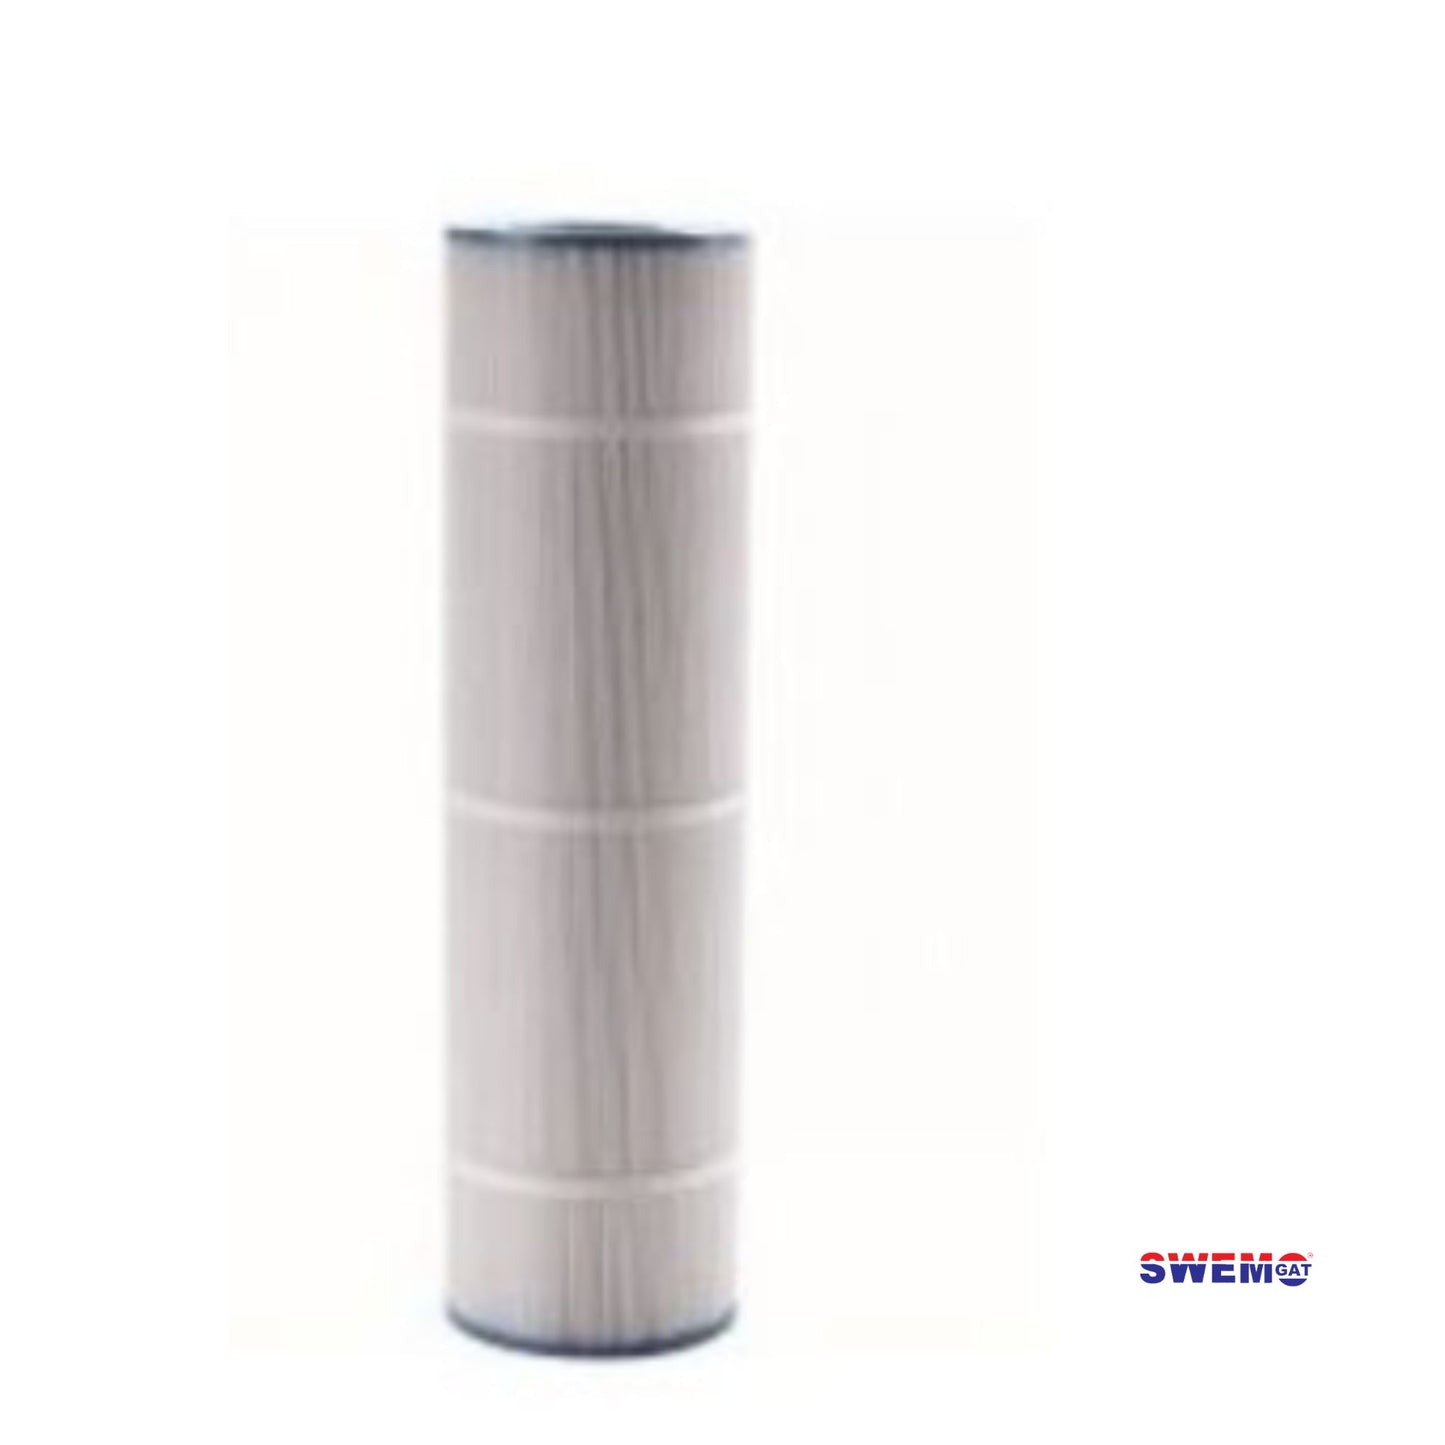 Speck Badu Eco Wise Replacement Cartridge Filter for Ecowise